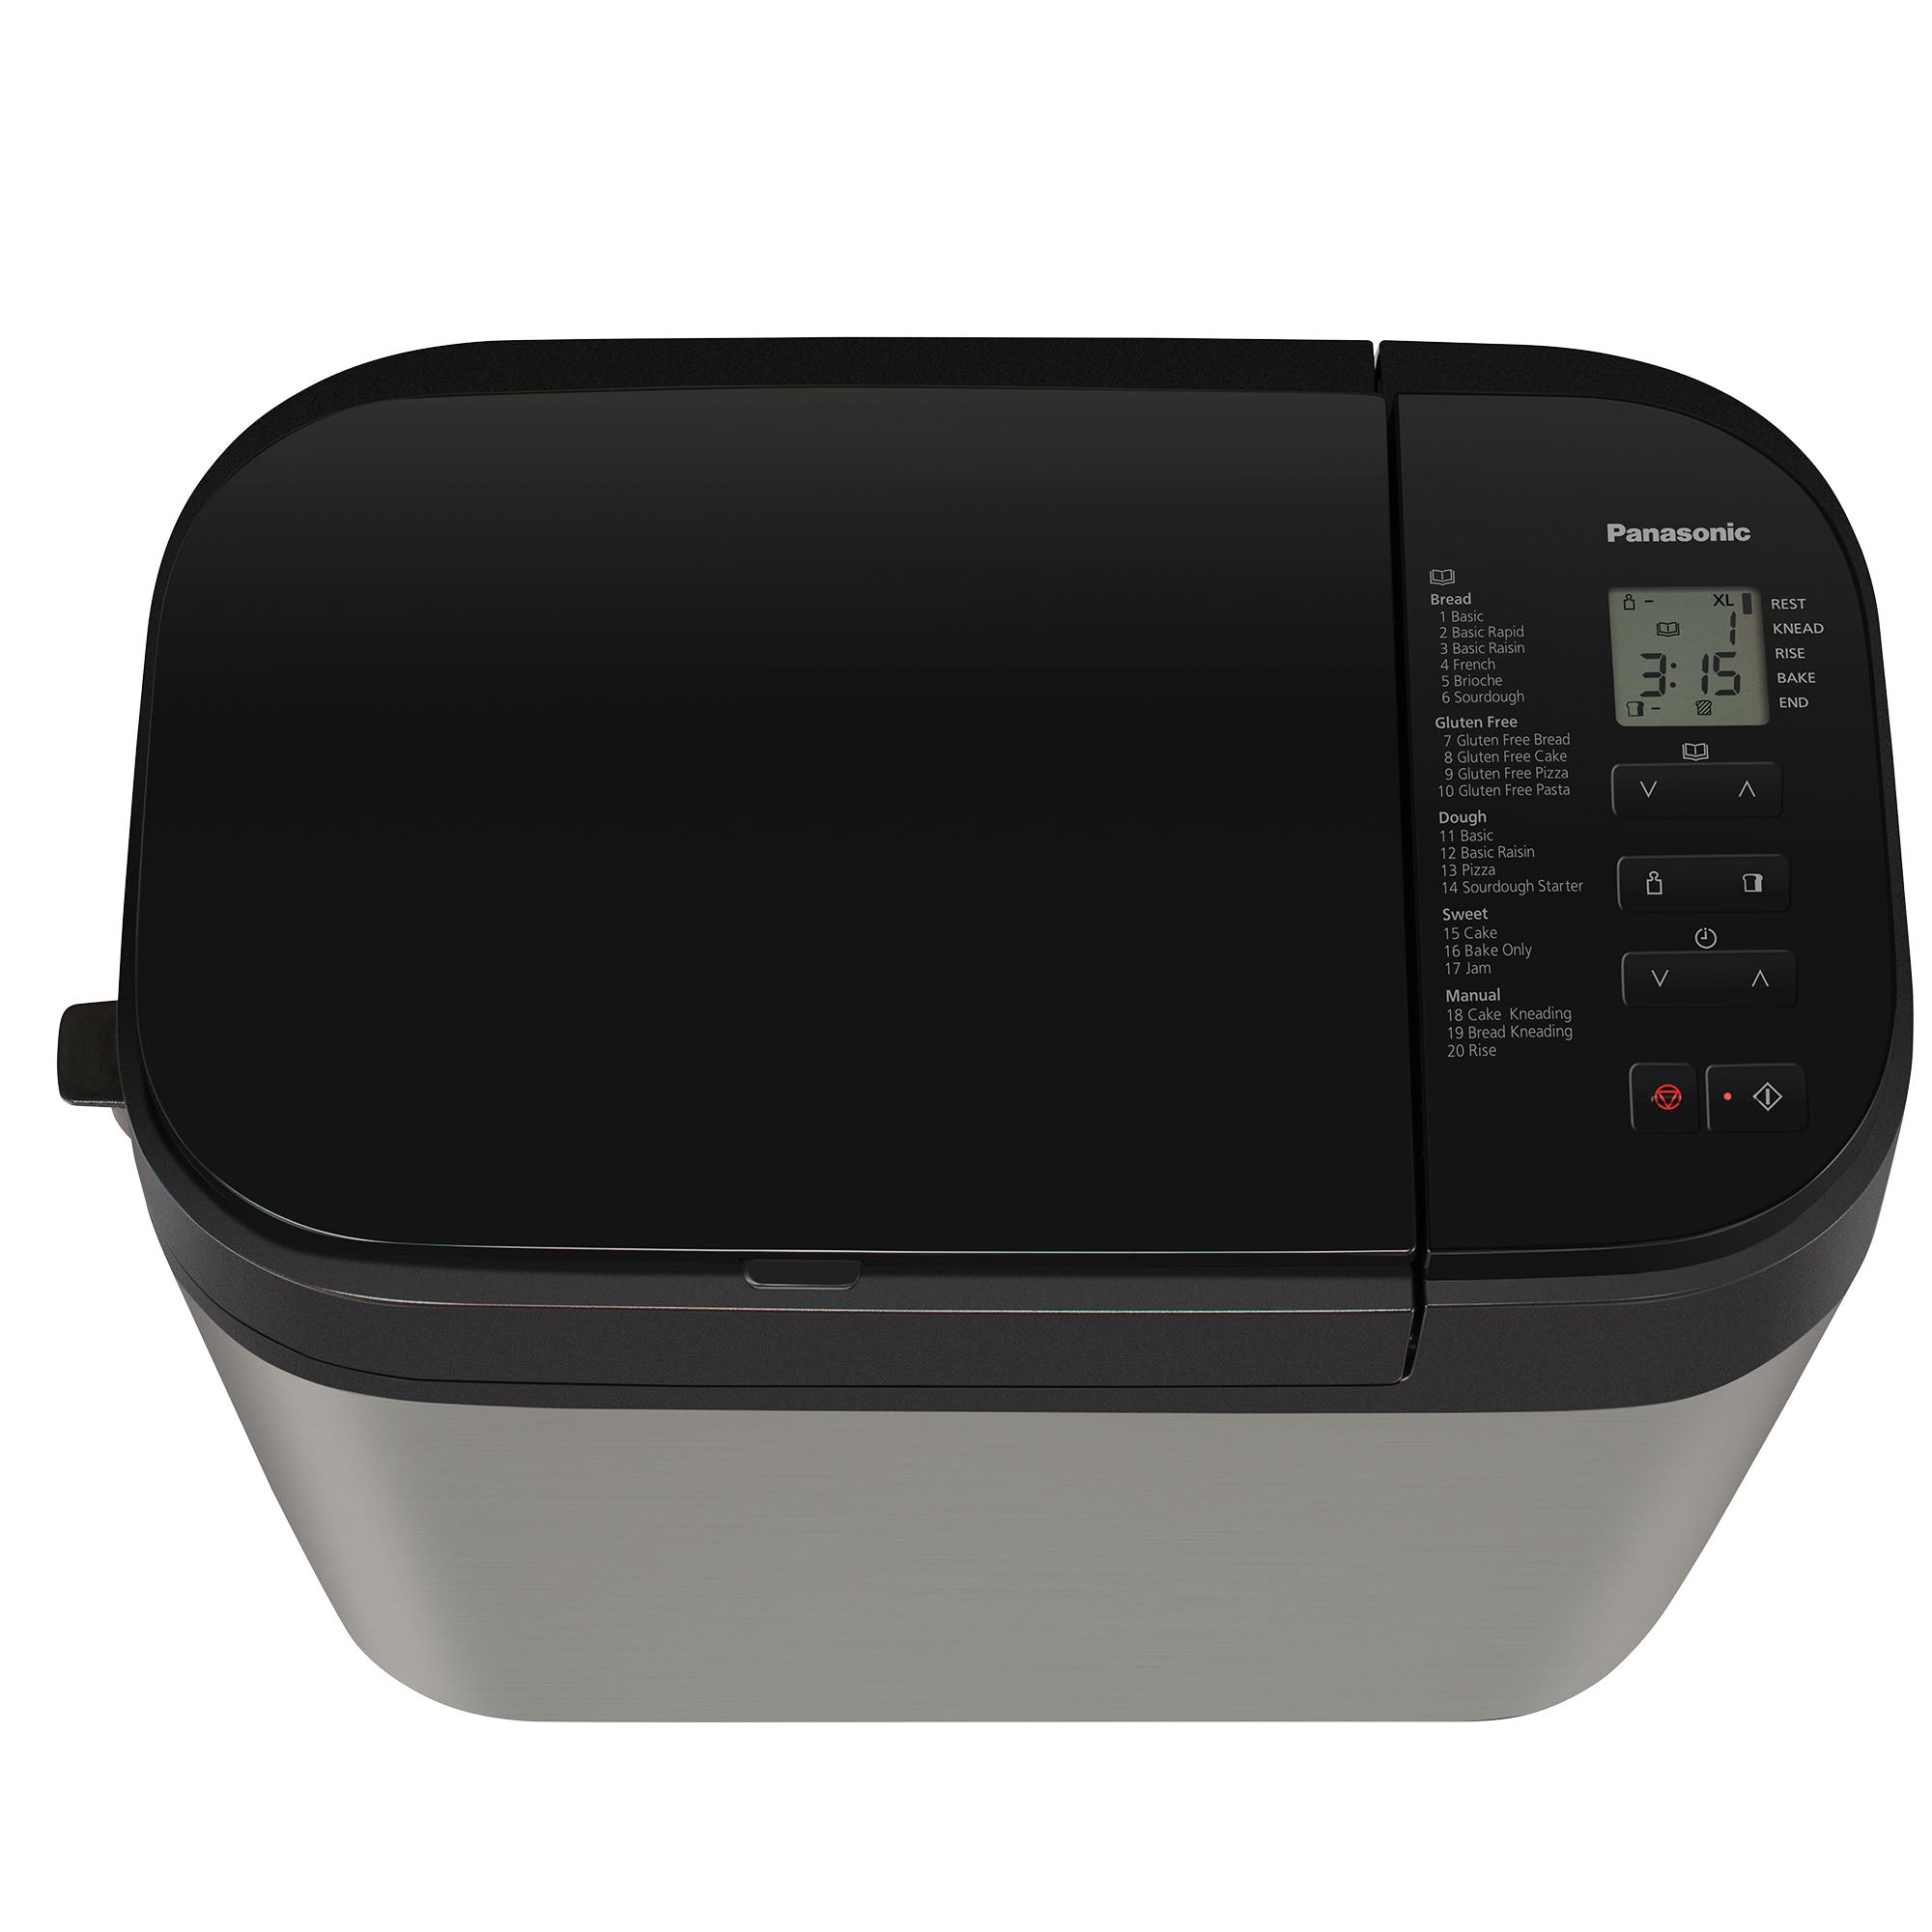 Panasonic Artisan-style Automatic Bread 20 with Presets Maker SD-R2550 